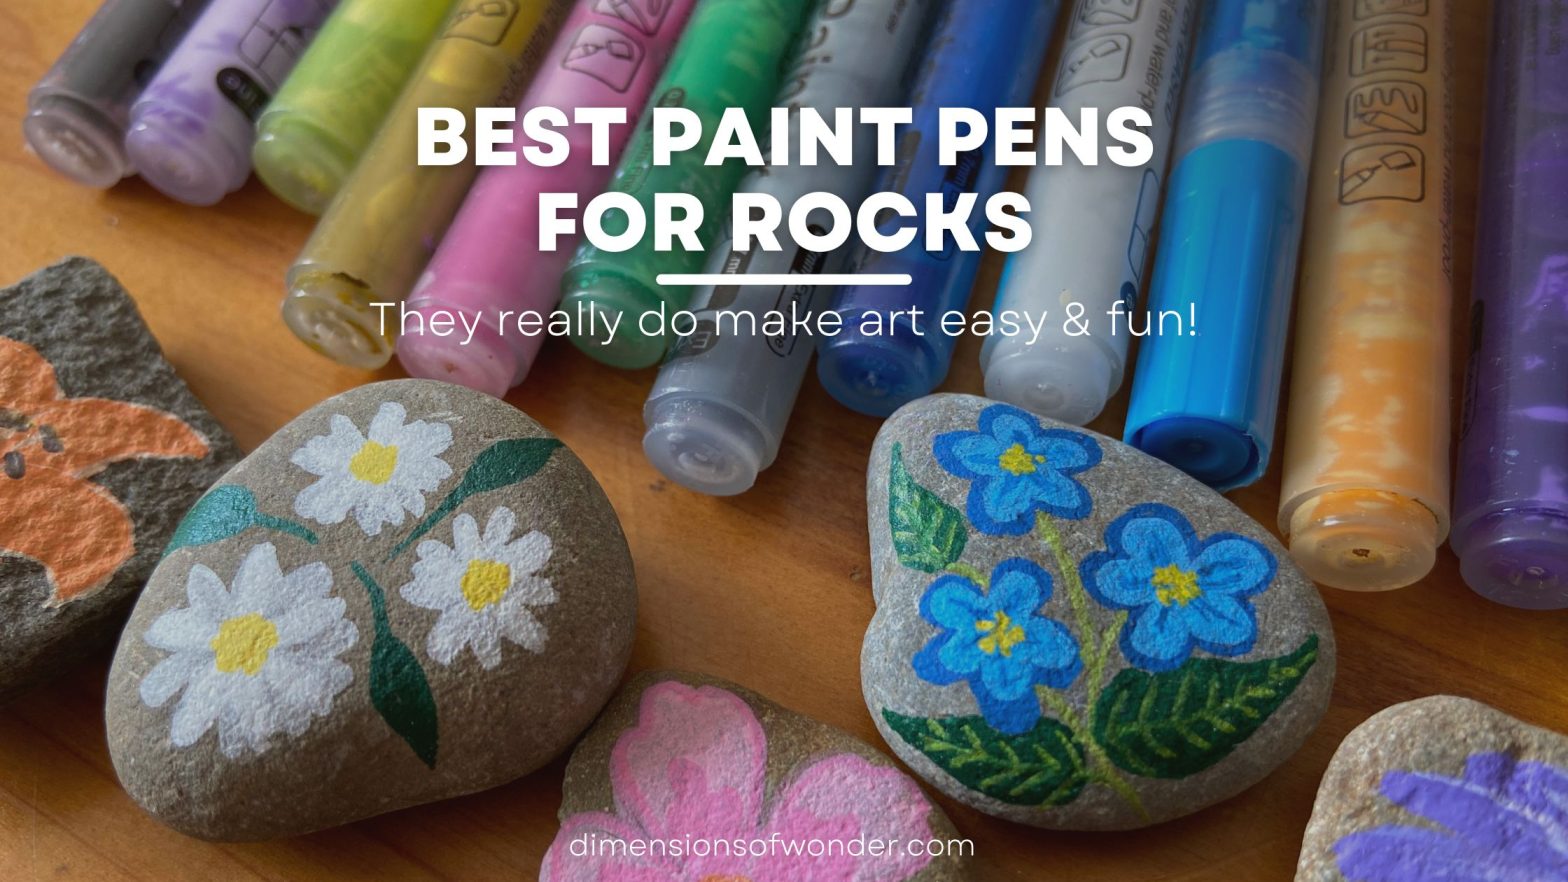 Best Paint Pens for Rocks: They Really Do Make Art Easy & Fun!